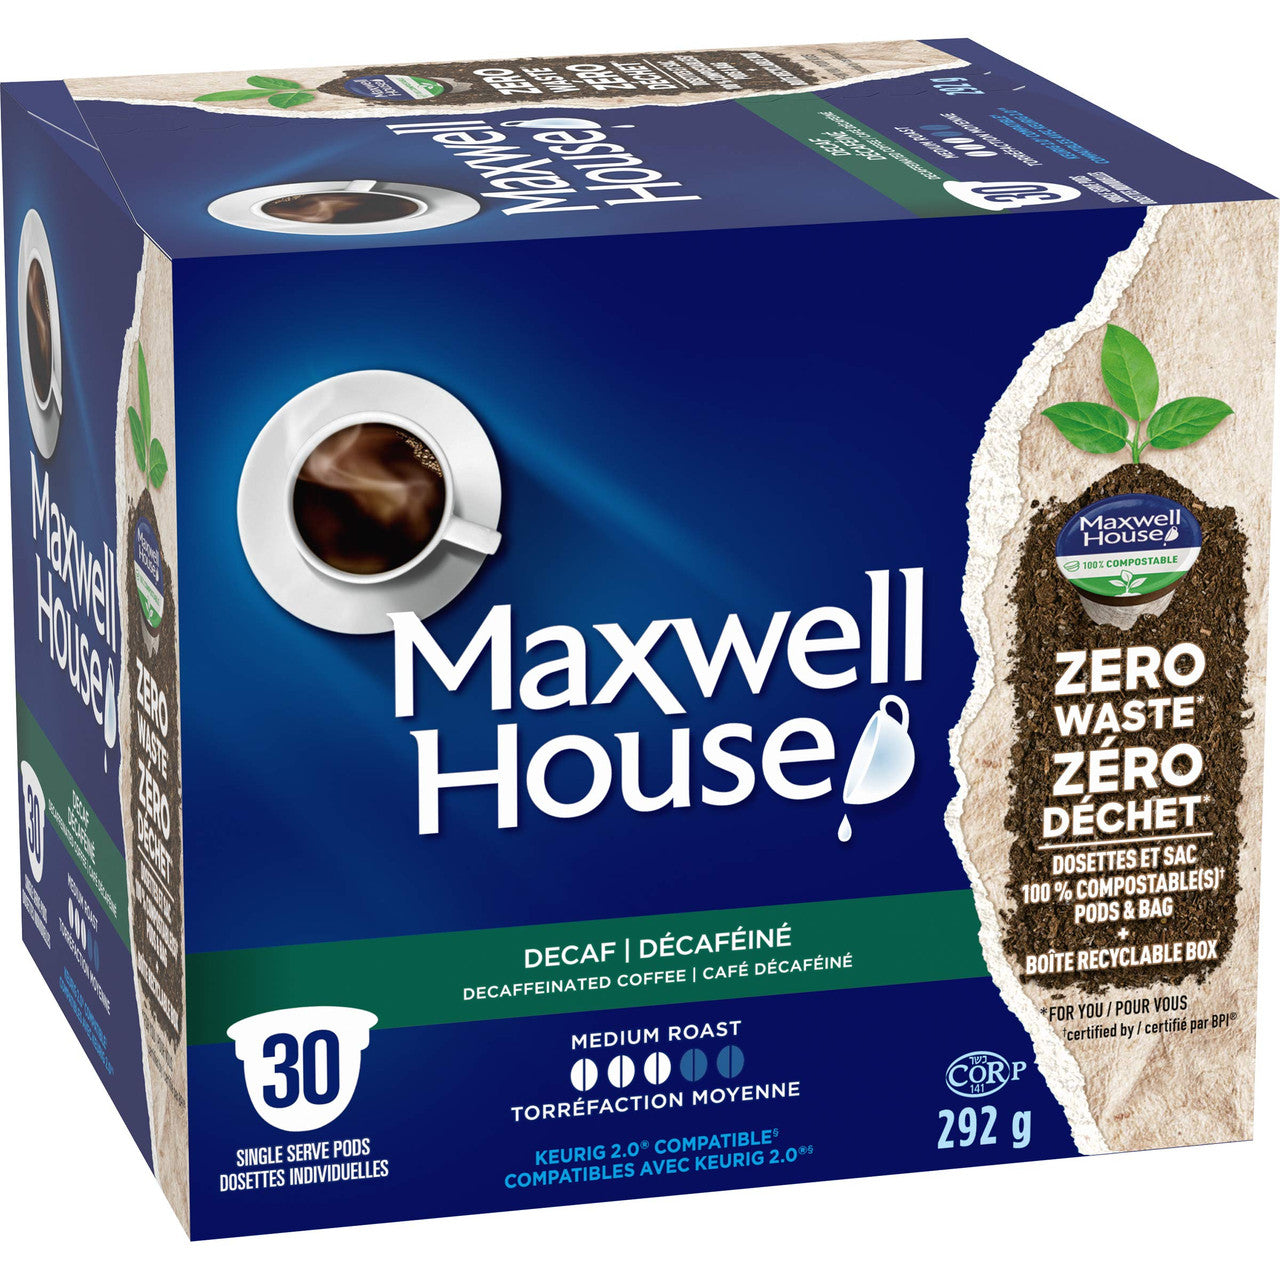 Maxwell House Decaf Coffee 100% Compostable Pods, 30 Keurig Pods, {Imported from Canada}